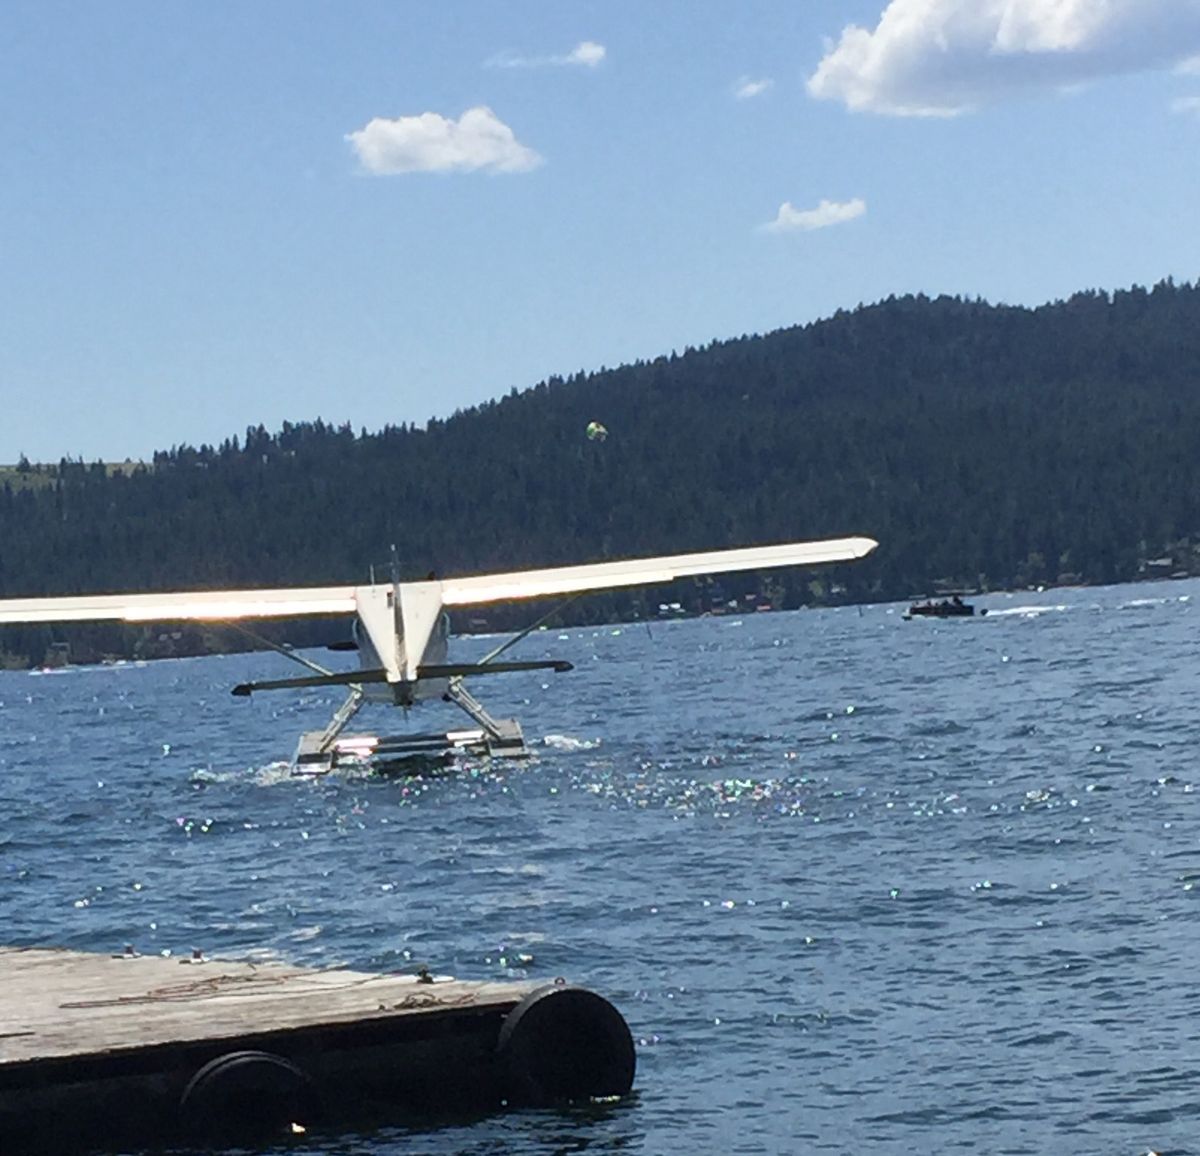 Michelle Schlote, a tourist in Coeur d’Alene, took this photo of a de Havilland seaplane that was involved in a midair crash on Sunday as it took off for its last flight. The plane collided in midair with a Cessna that had taken off from Felts Field in Spokane.  (Courtesy of Michelle Schlote)